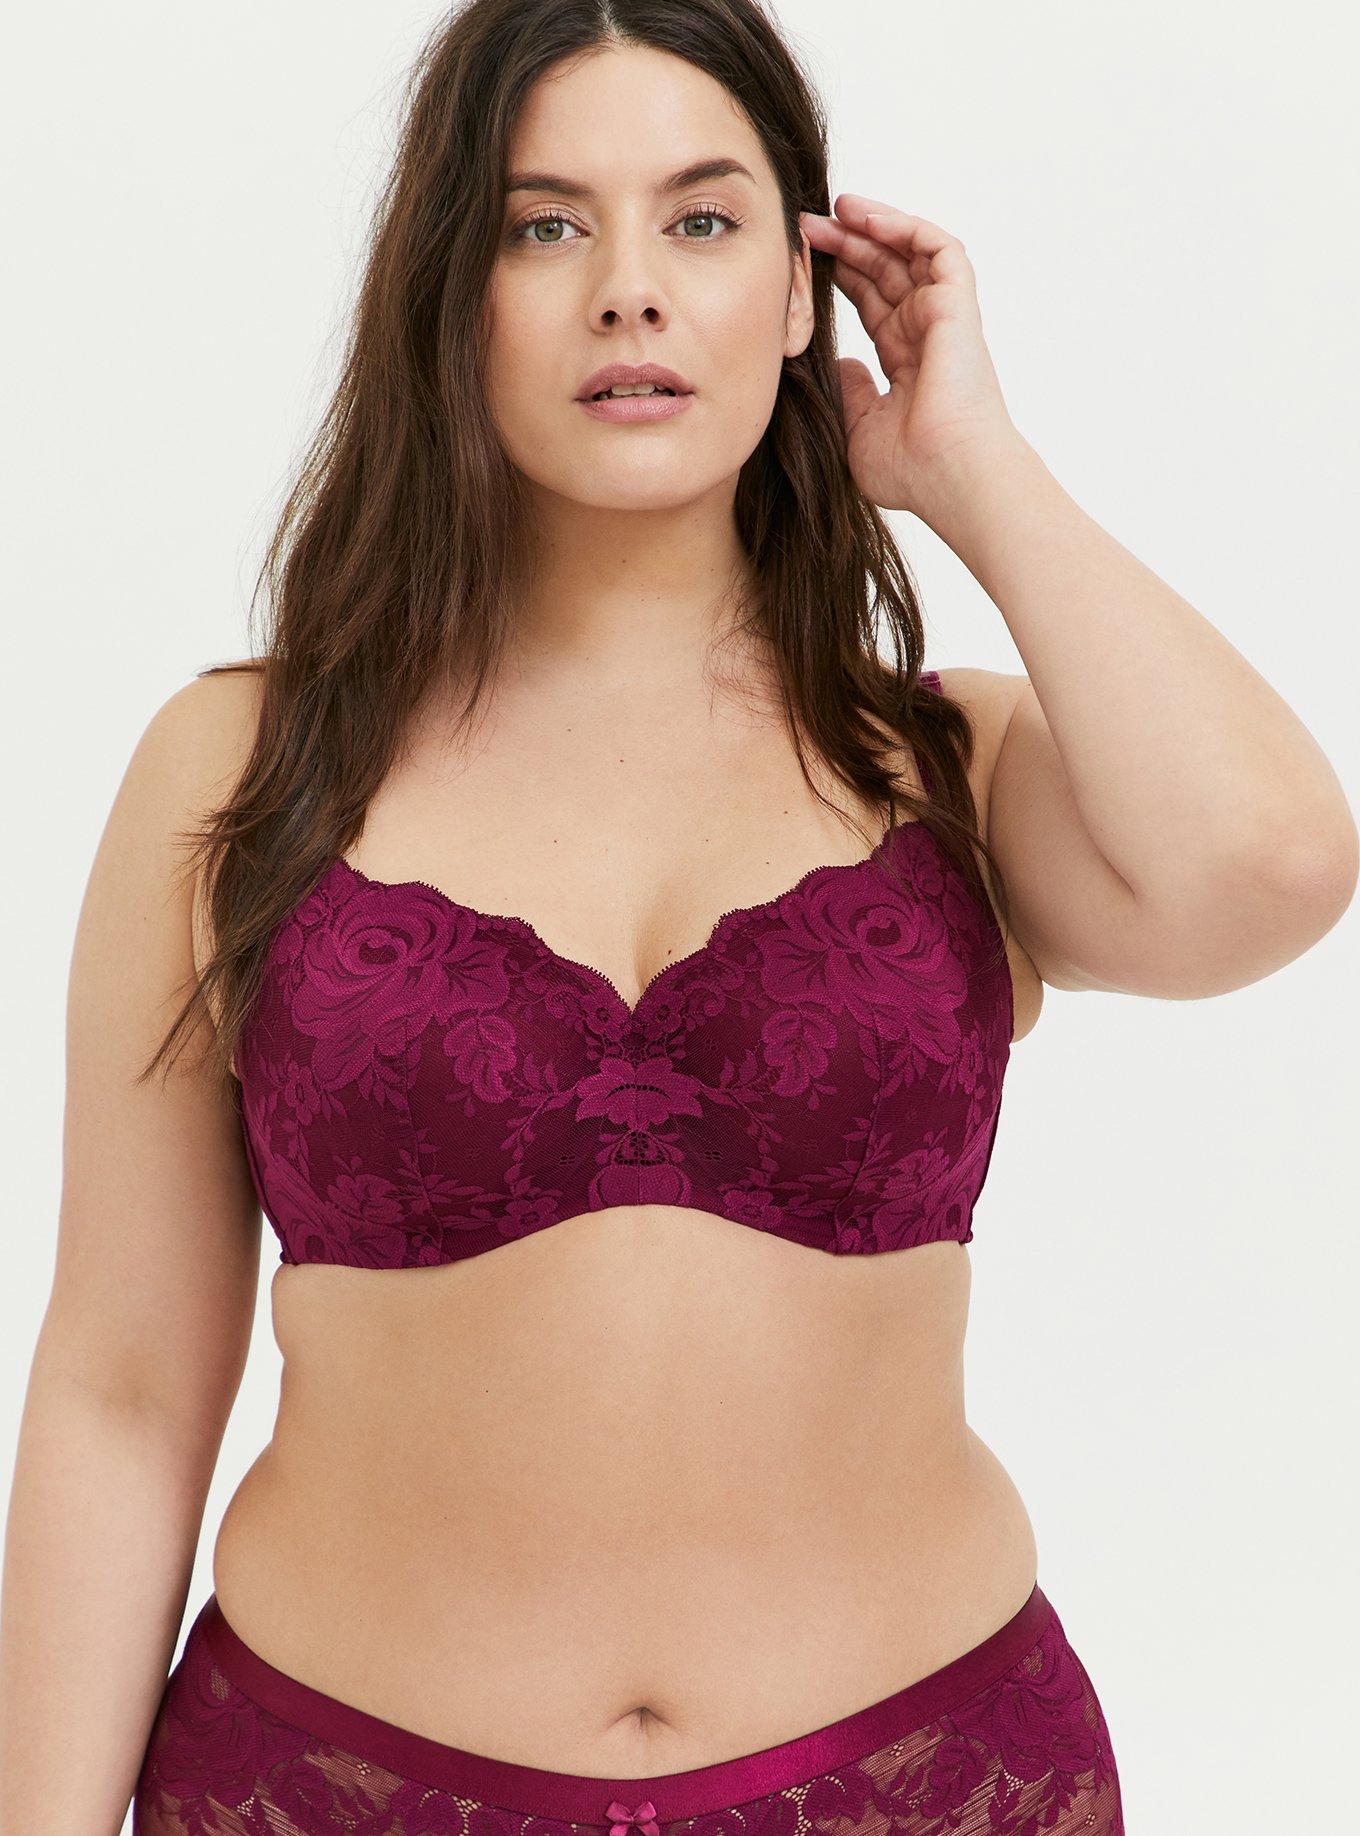 Torrid Bra! Dotted Lace! Back-Smoothing! Sizes 46B & 44C, 46C, 38D